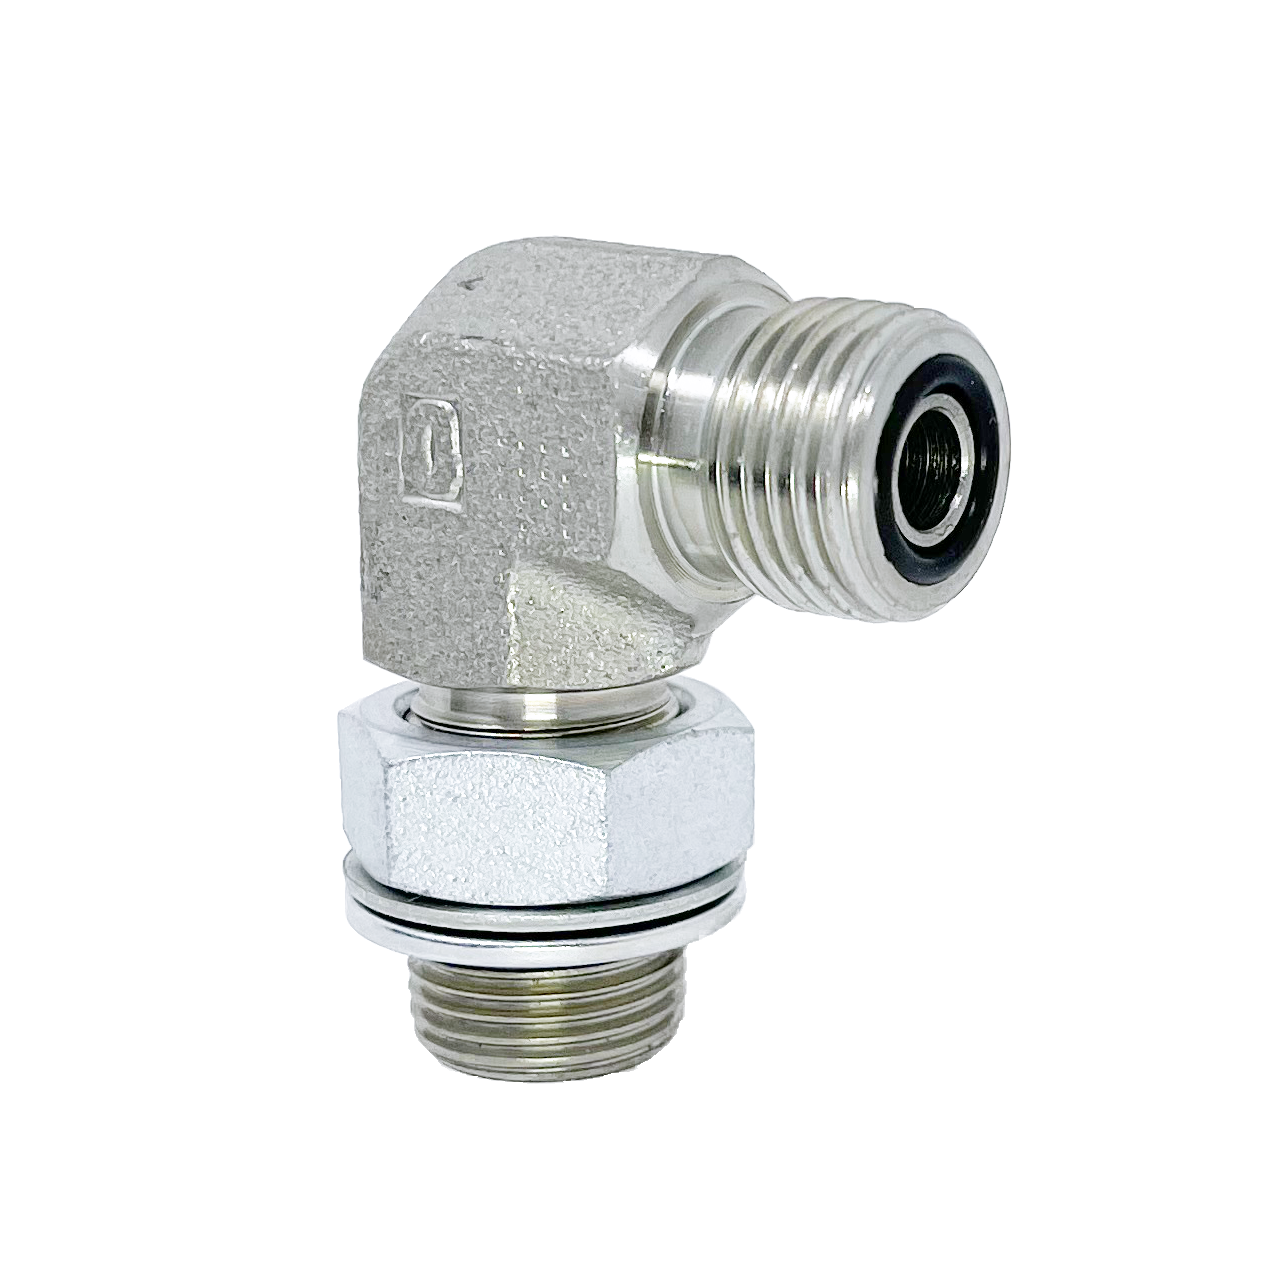 6059-08-06 : Adaptall 90-Degree  Adapter, Male 0.5 (1/2") ORFS x Male 0.375 (3/8") BSPP, Carbon Steel